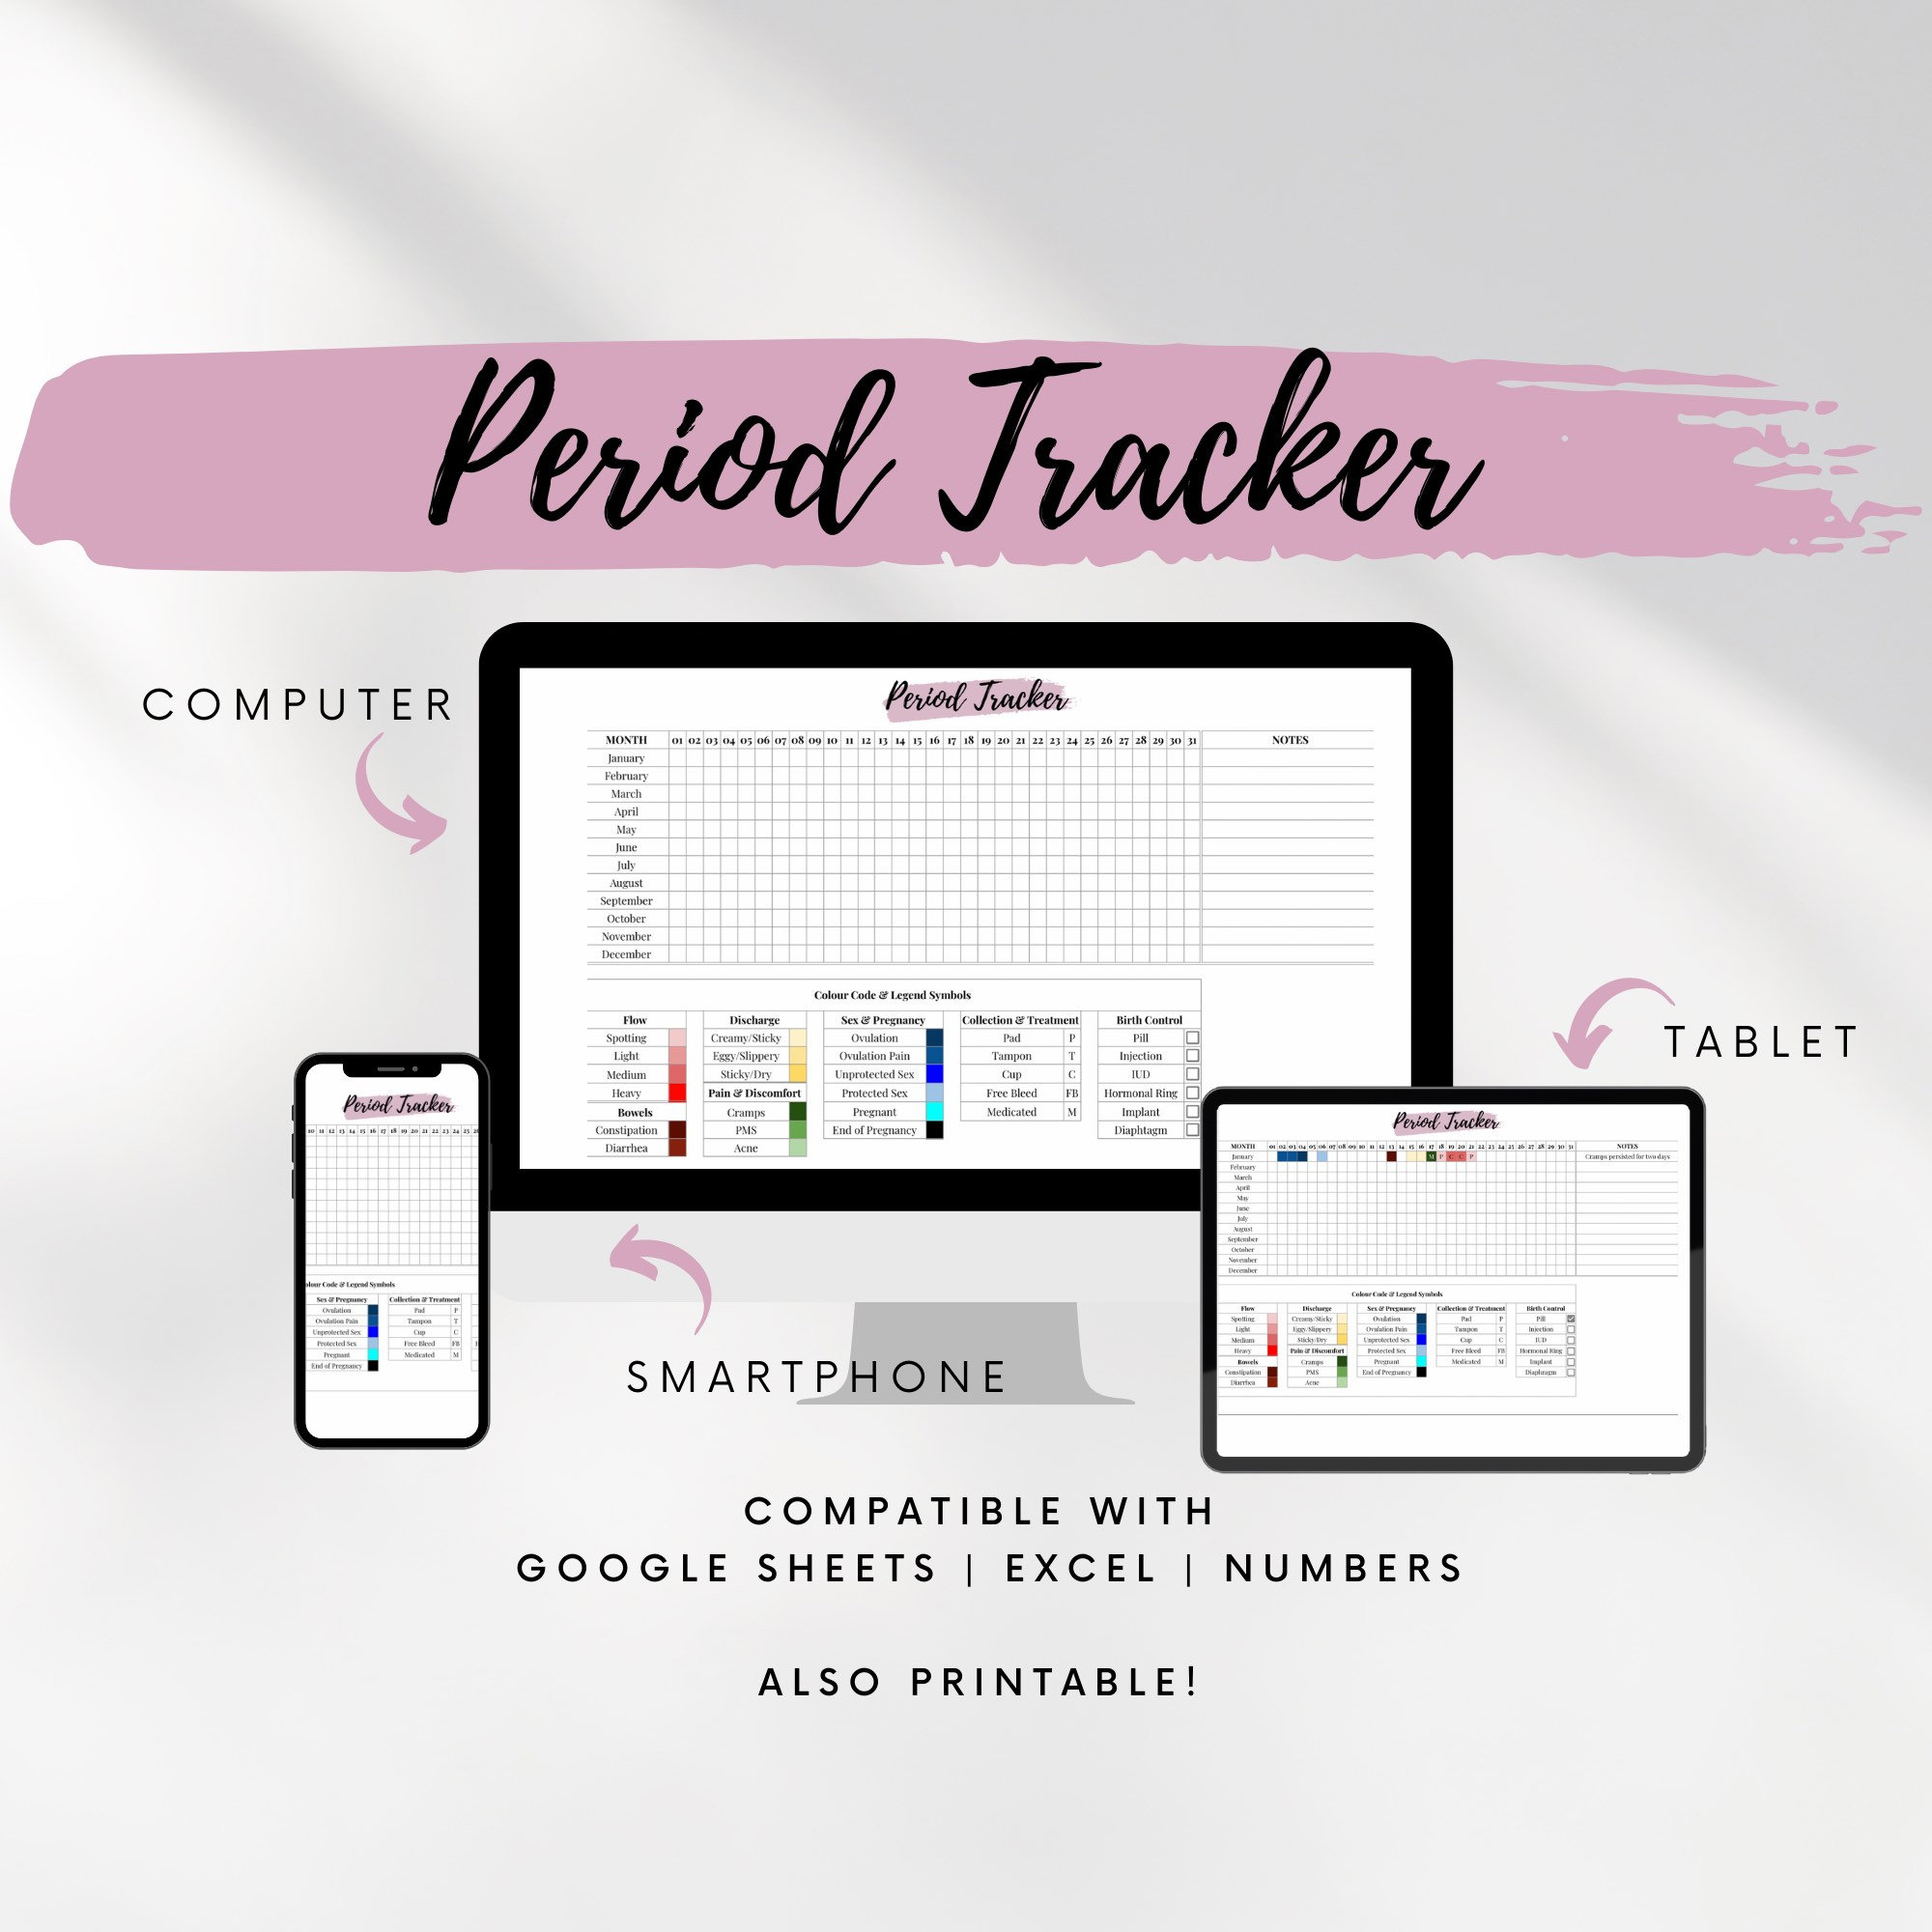 Period Tracker Tabellenvorlage Google Sheets, Excel, Zahlen Oder within Acne Free Coupons Printable